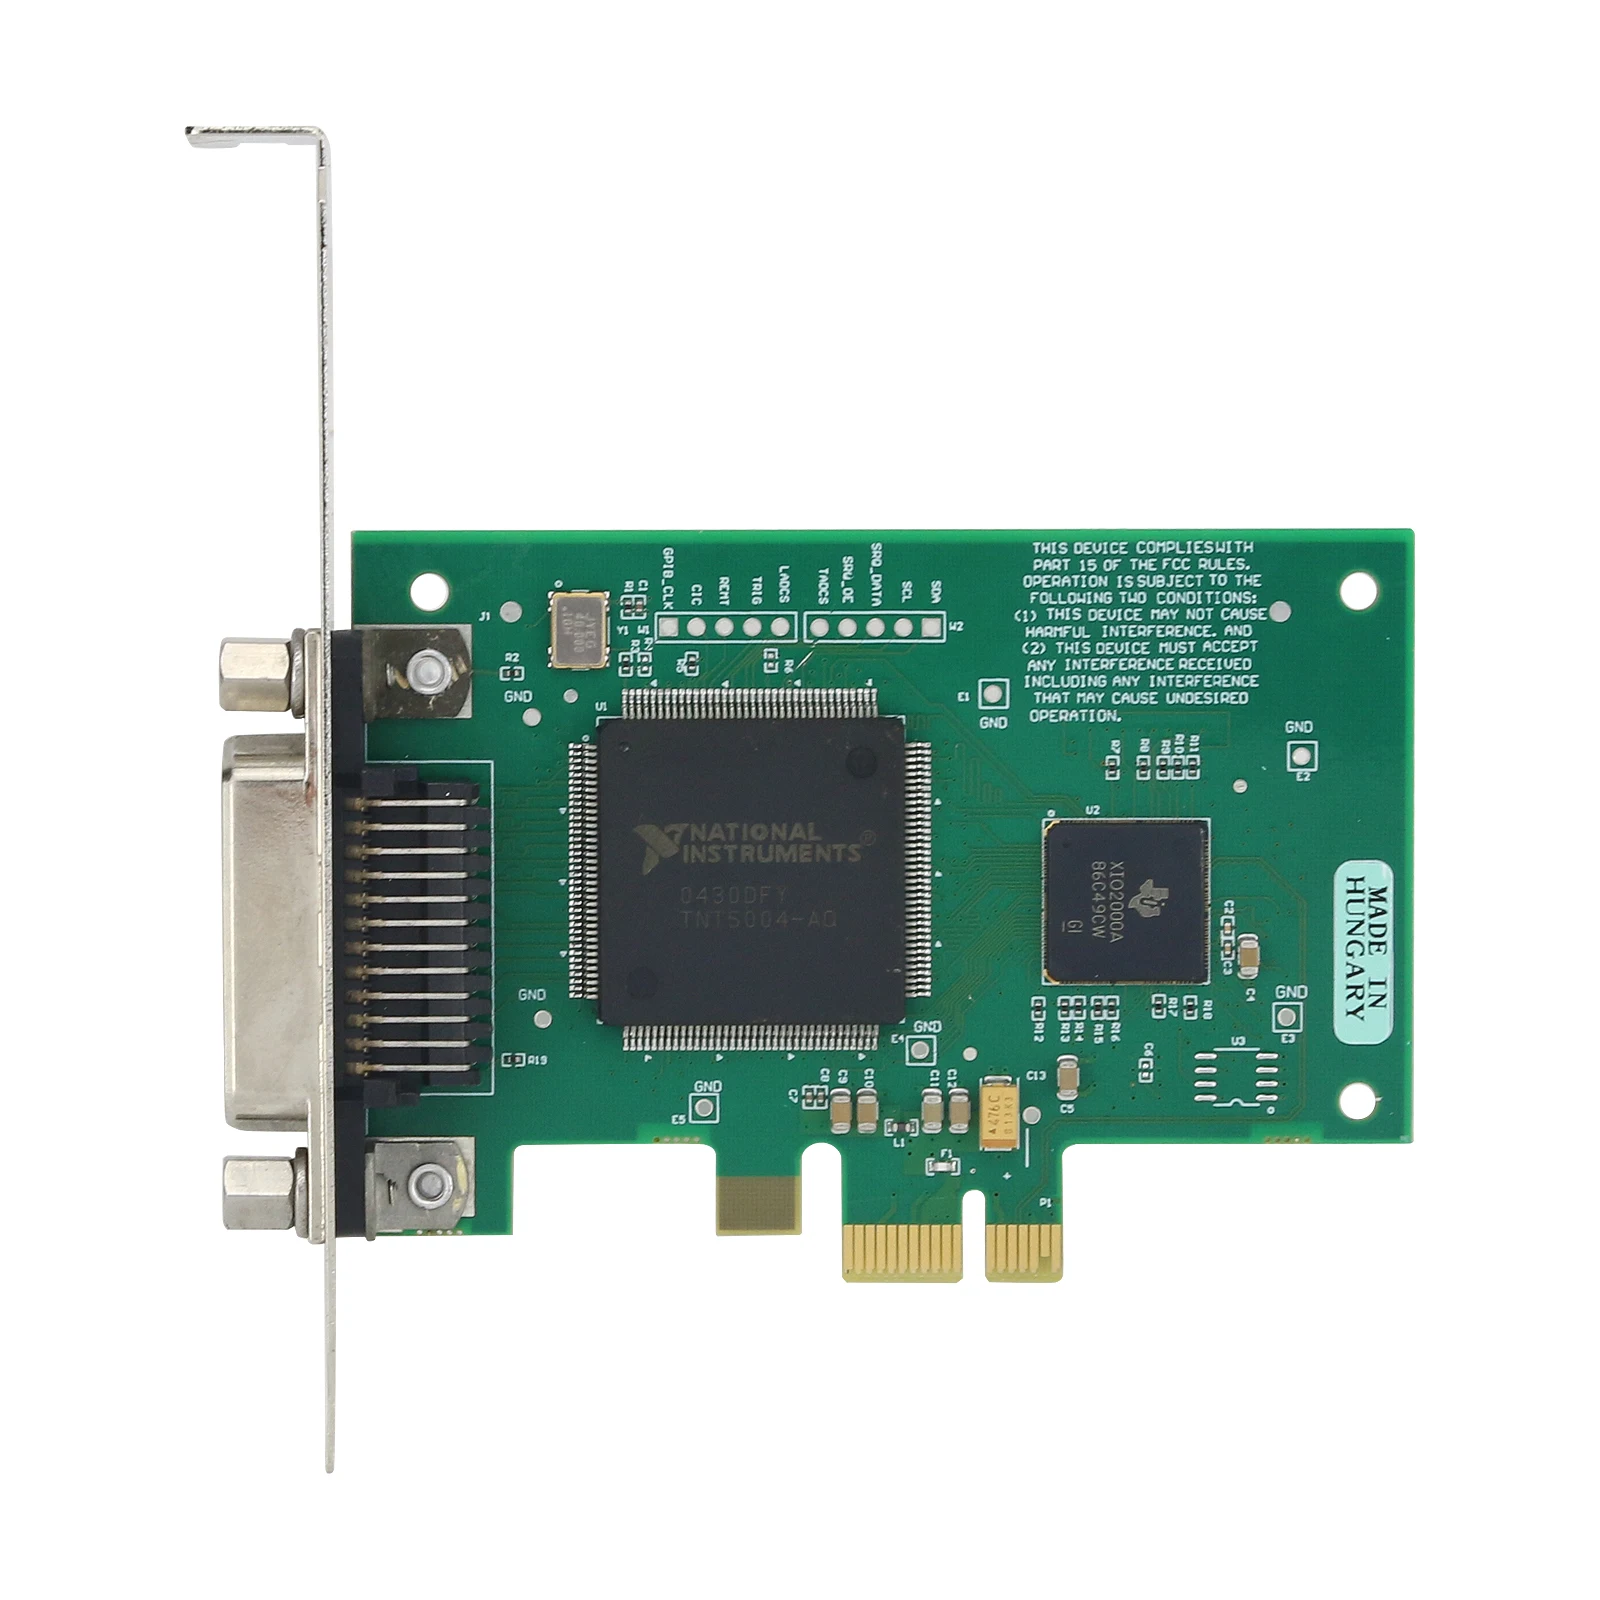 

PCIe-GPIB 778930-01 Original GPIB Card Controller High Speed and Quality Assurance GPIB Card for NI